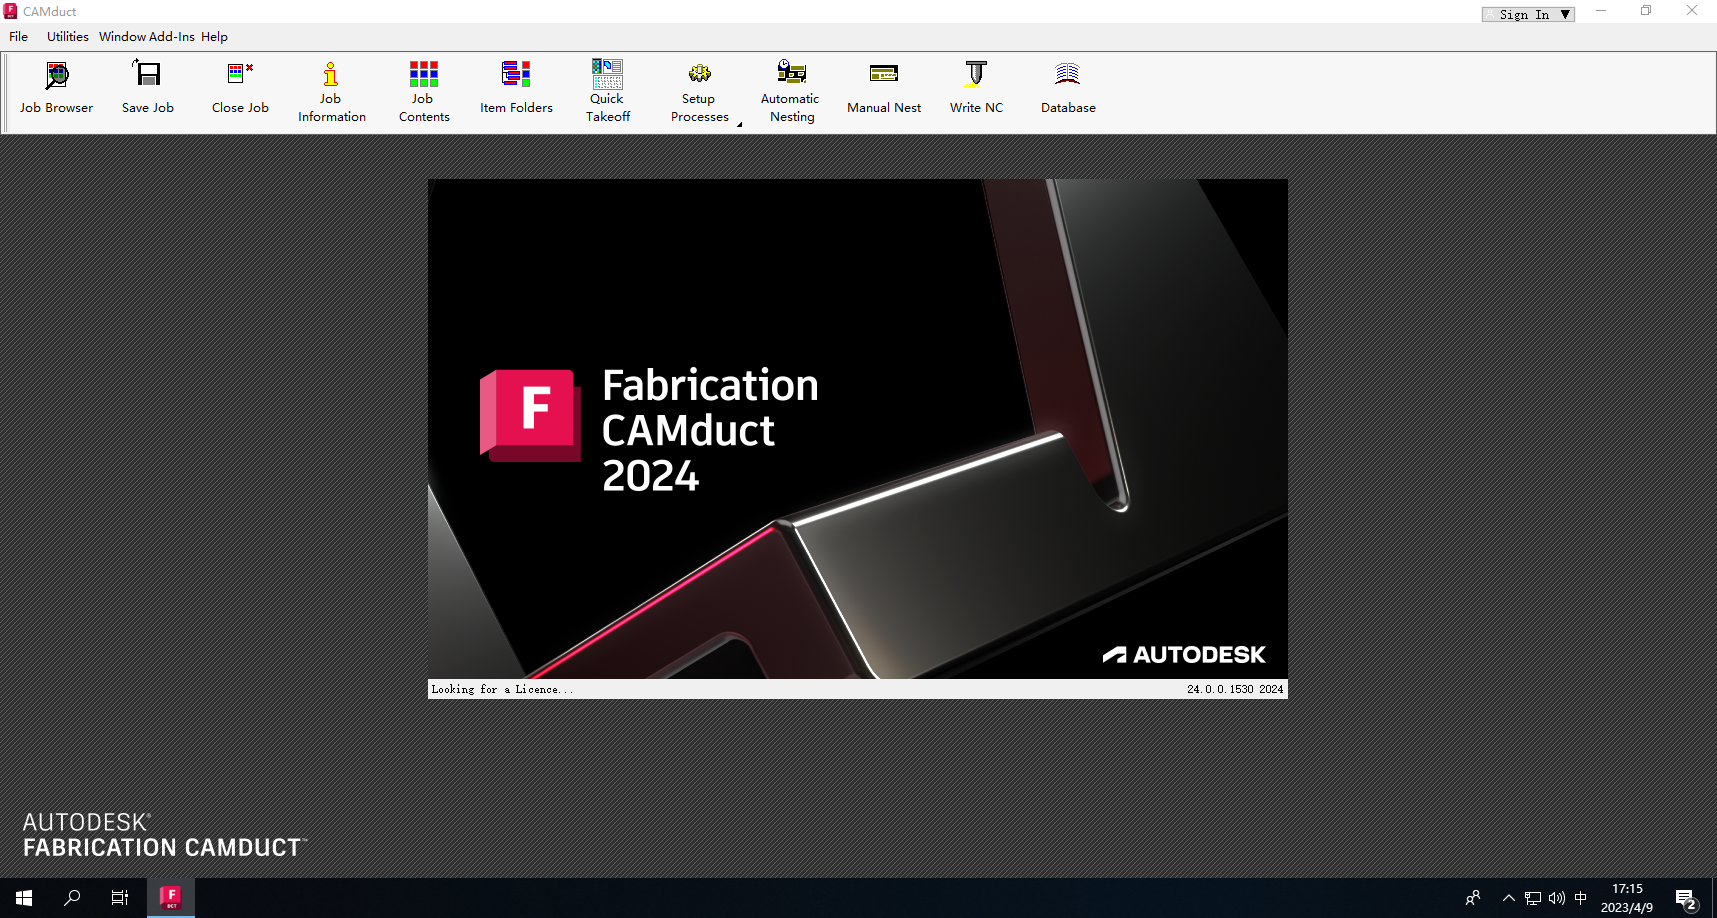 download the last version for ios Autodesk Fabrication CAMduct 2024.0.1